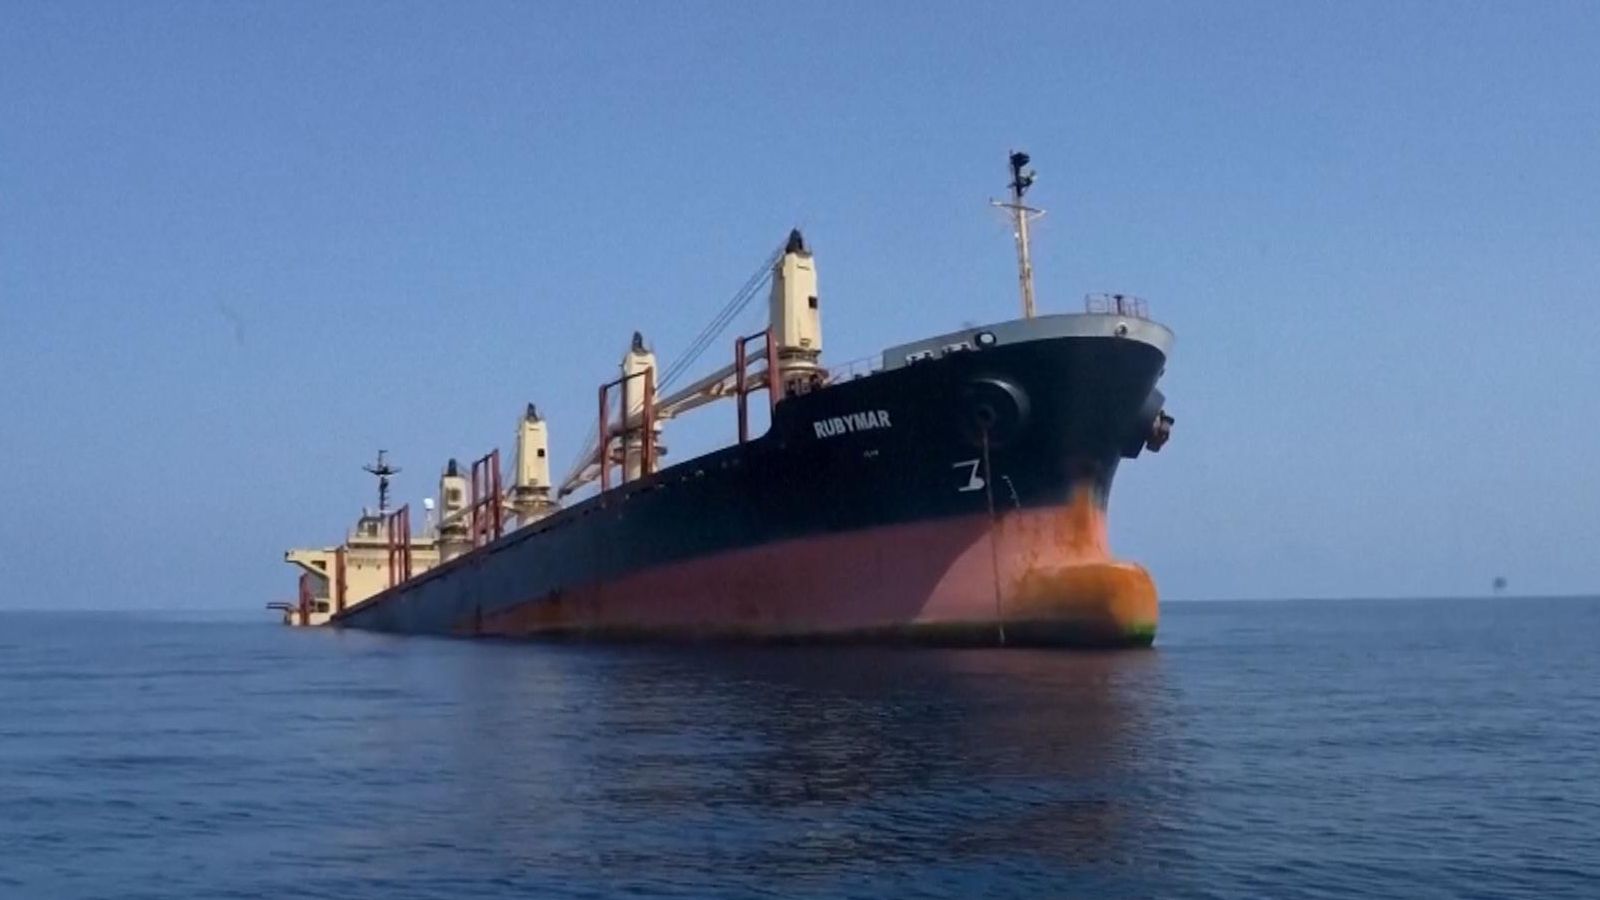 houthis namecheck george galloway in message to sunak as cargo ship sinks